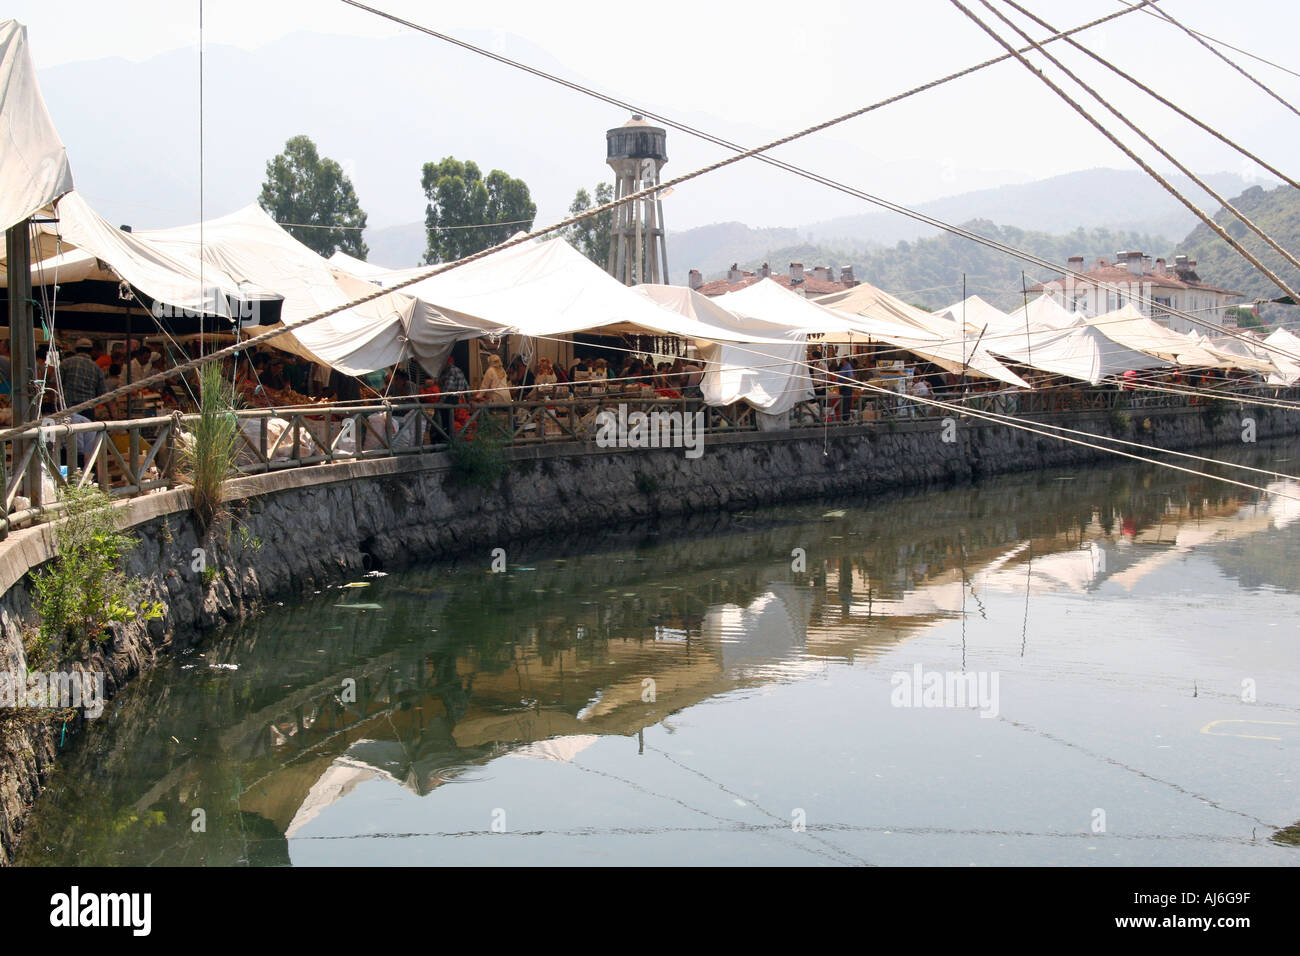 The traditional tented market at Fethiye Turkey the tents reflected in the canal  Stock Photo